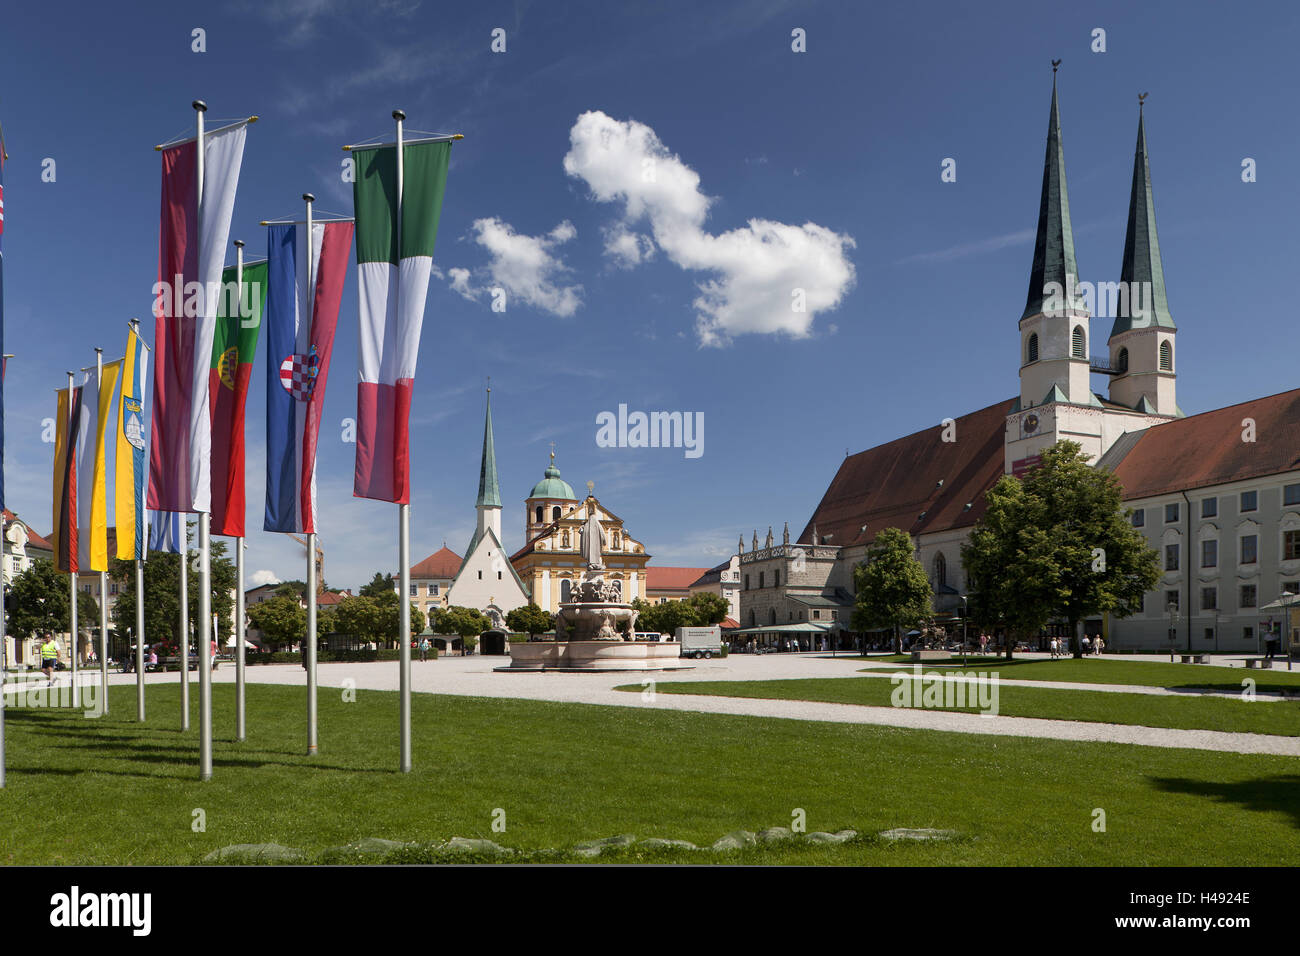 Germany, Upper Bavaria, Altötting, band space, town, architecture, pilgrimage, church, band, space, religion, well, Bavarian, grace band, town parish church, structure, sacred building, faith, pilgrimages, place of pilgrimage, pilgrim's sites, religion, f Stock Photo